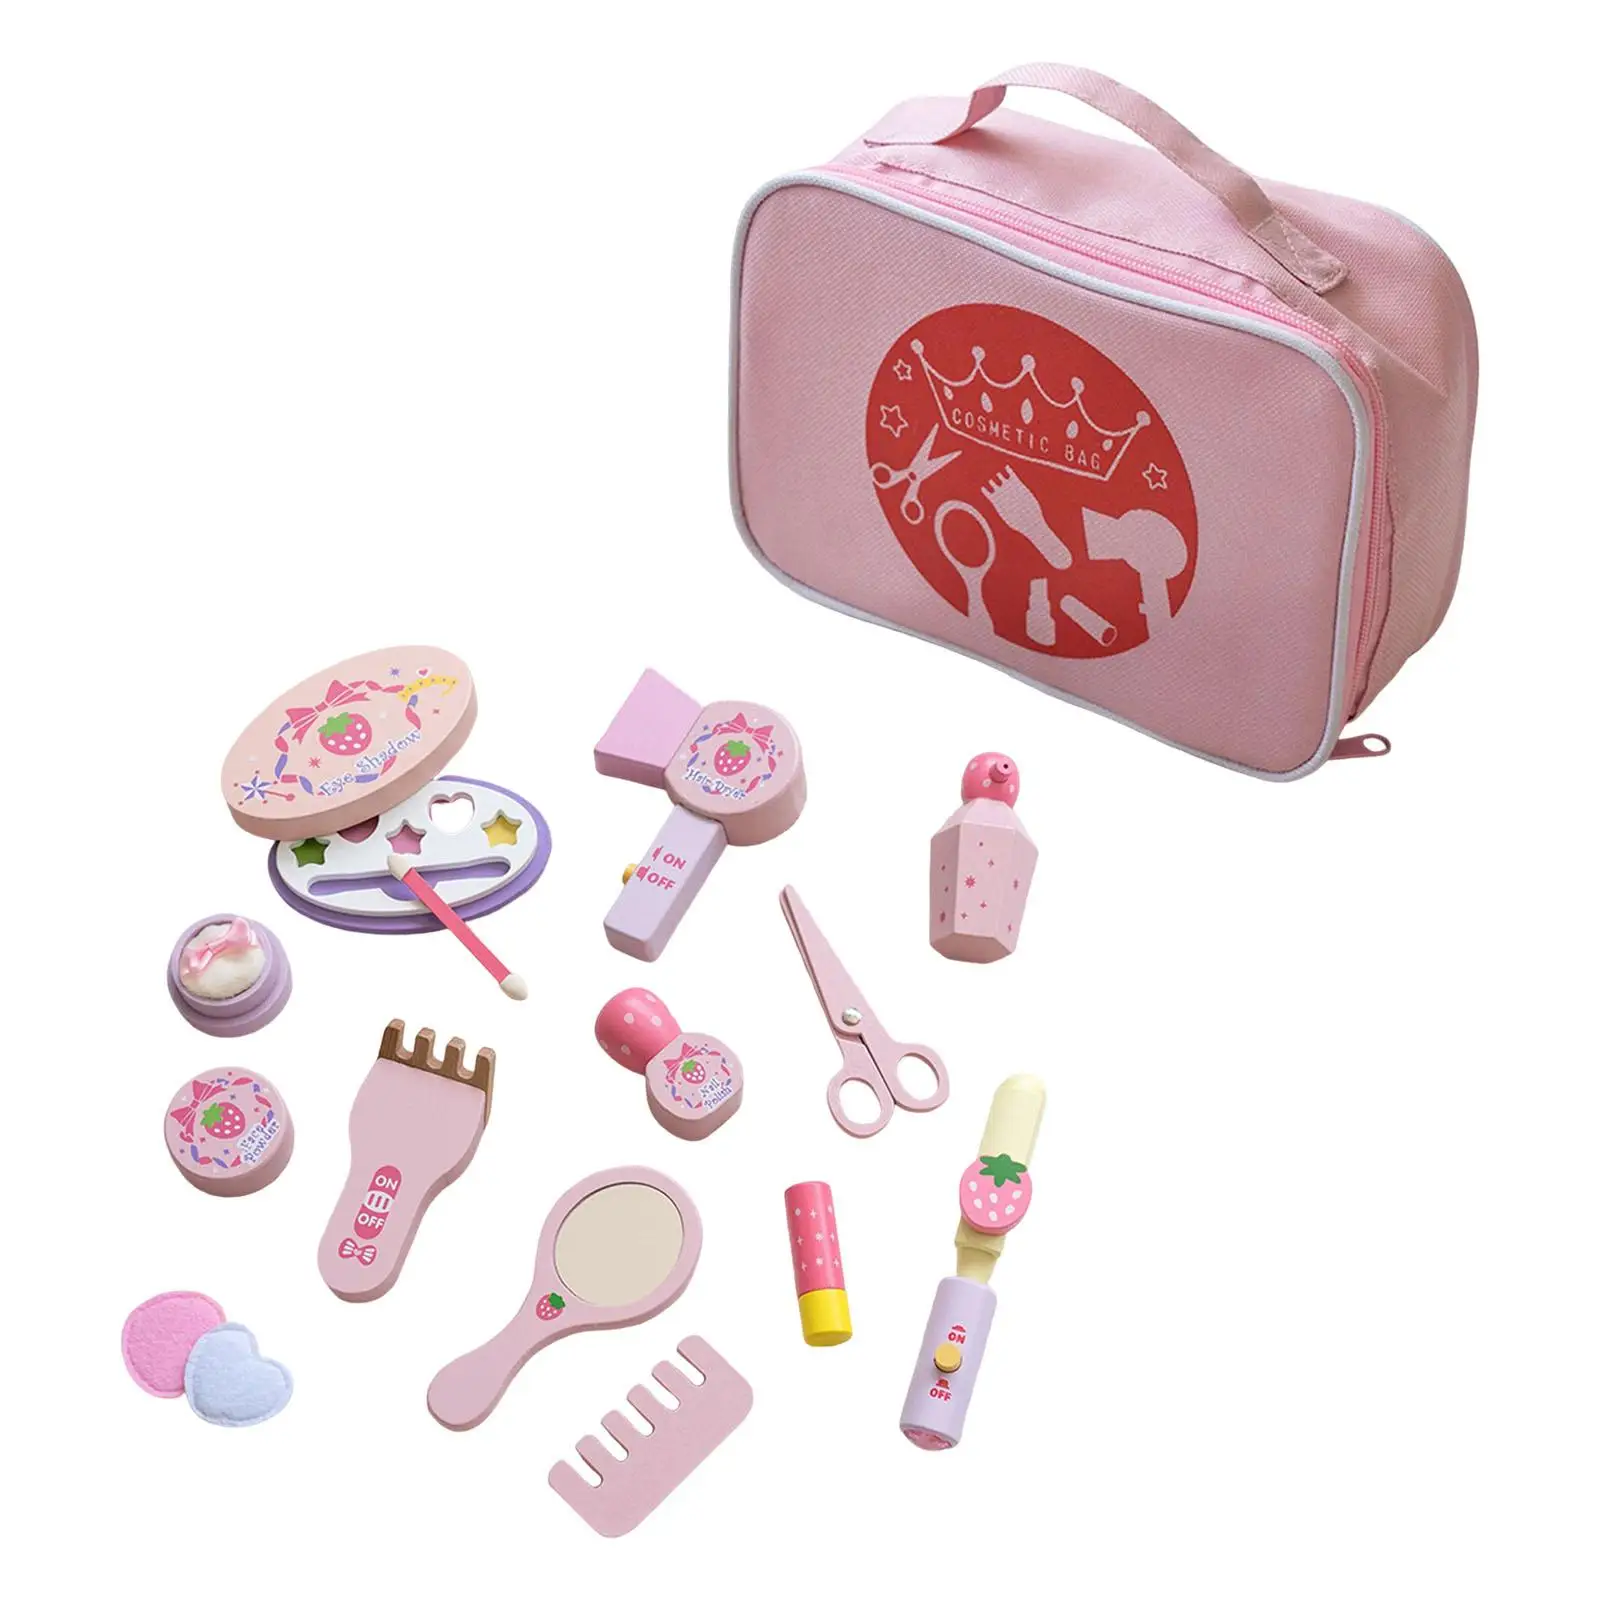 Pretend Makeup Game Gifts with Cosmetic Bag Washable Play House Toys Set for